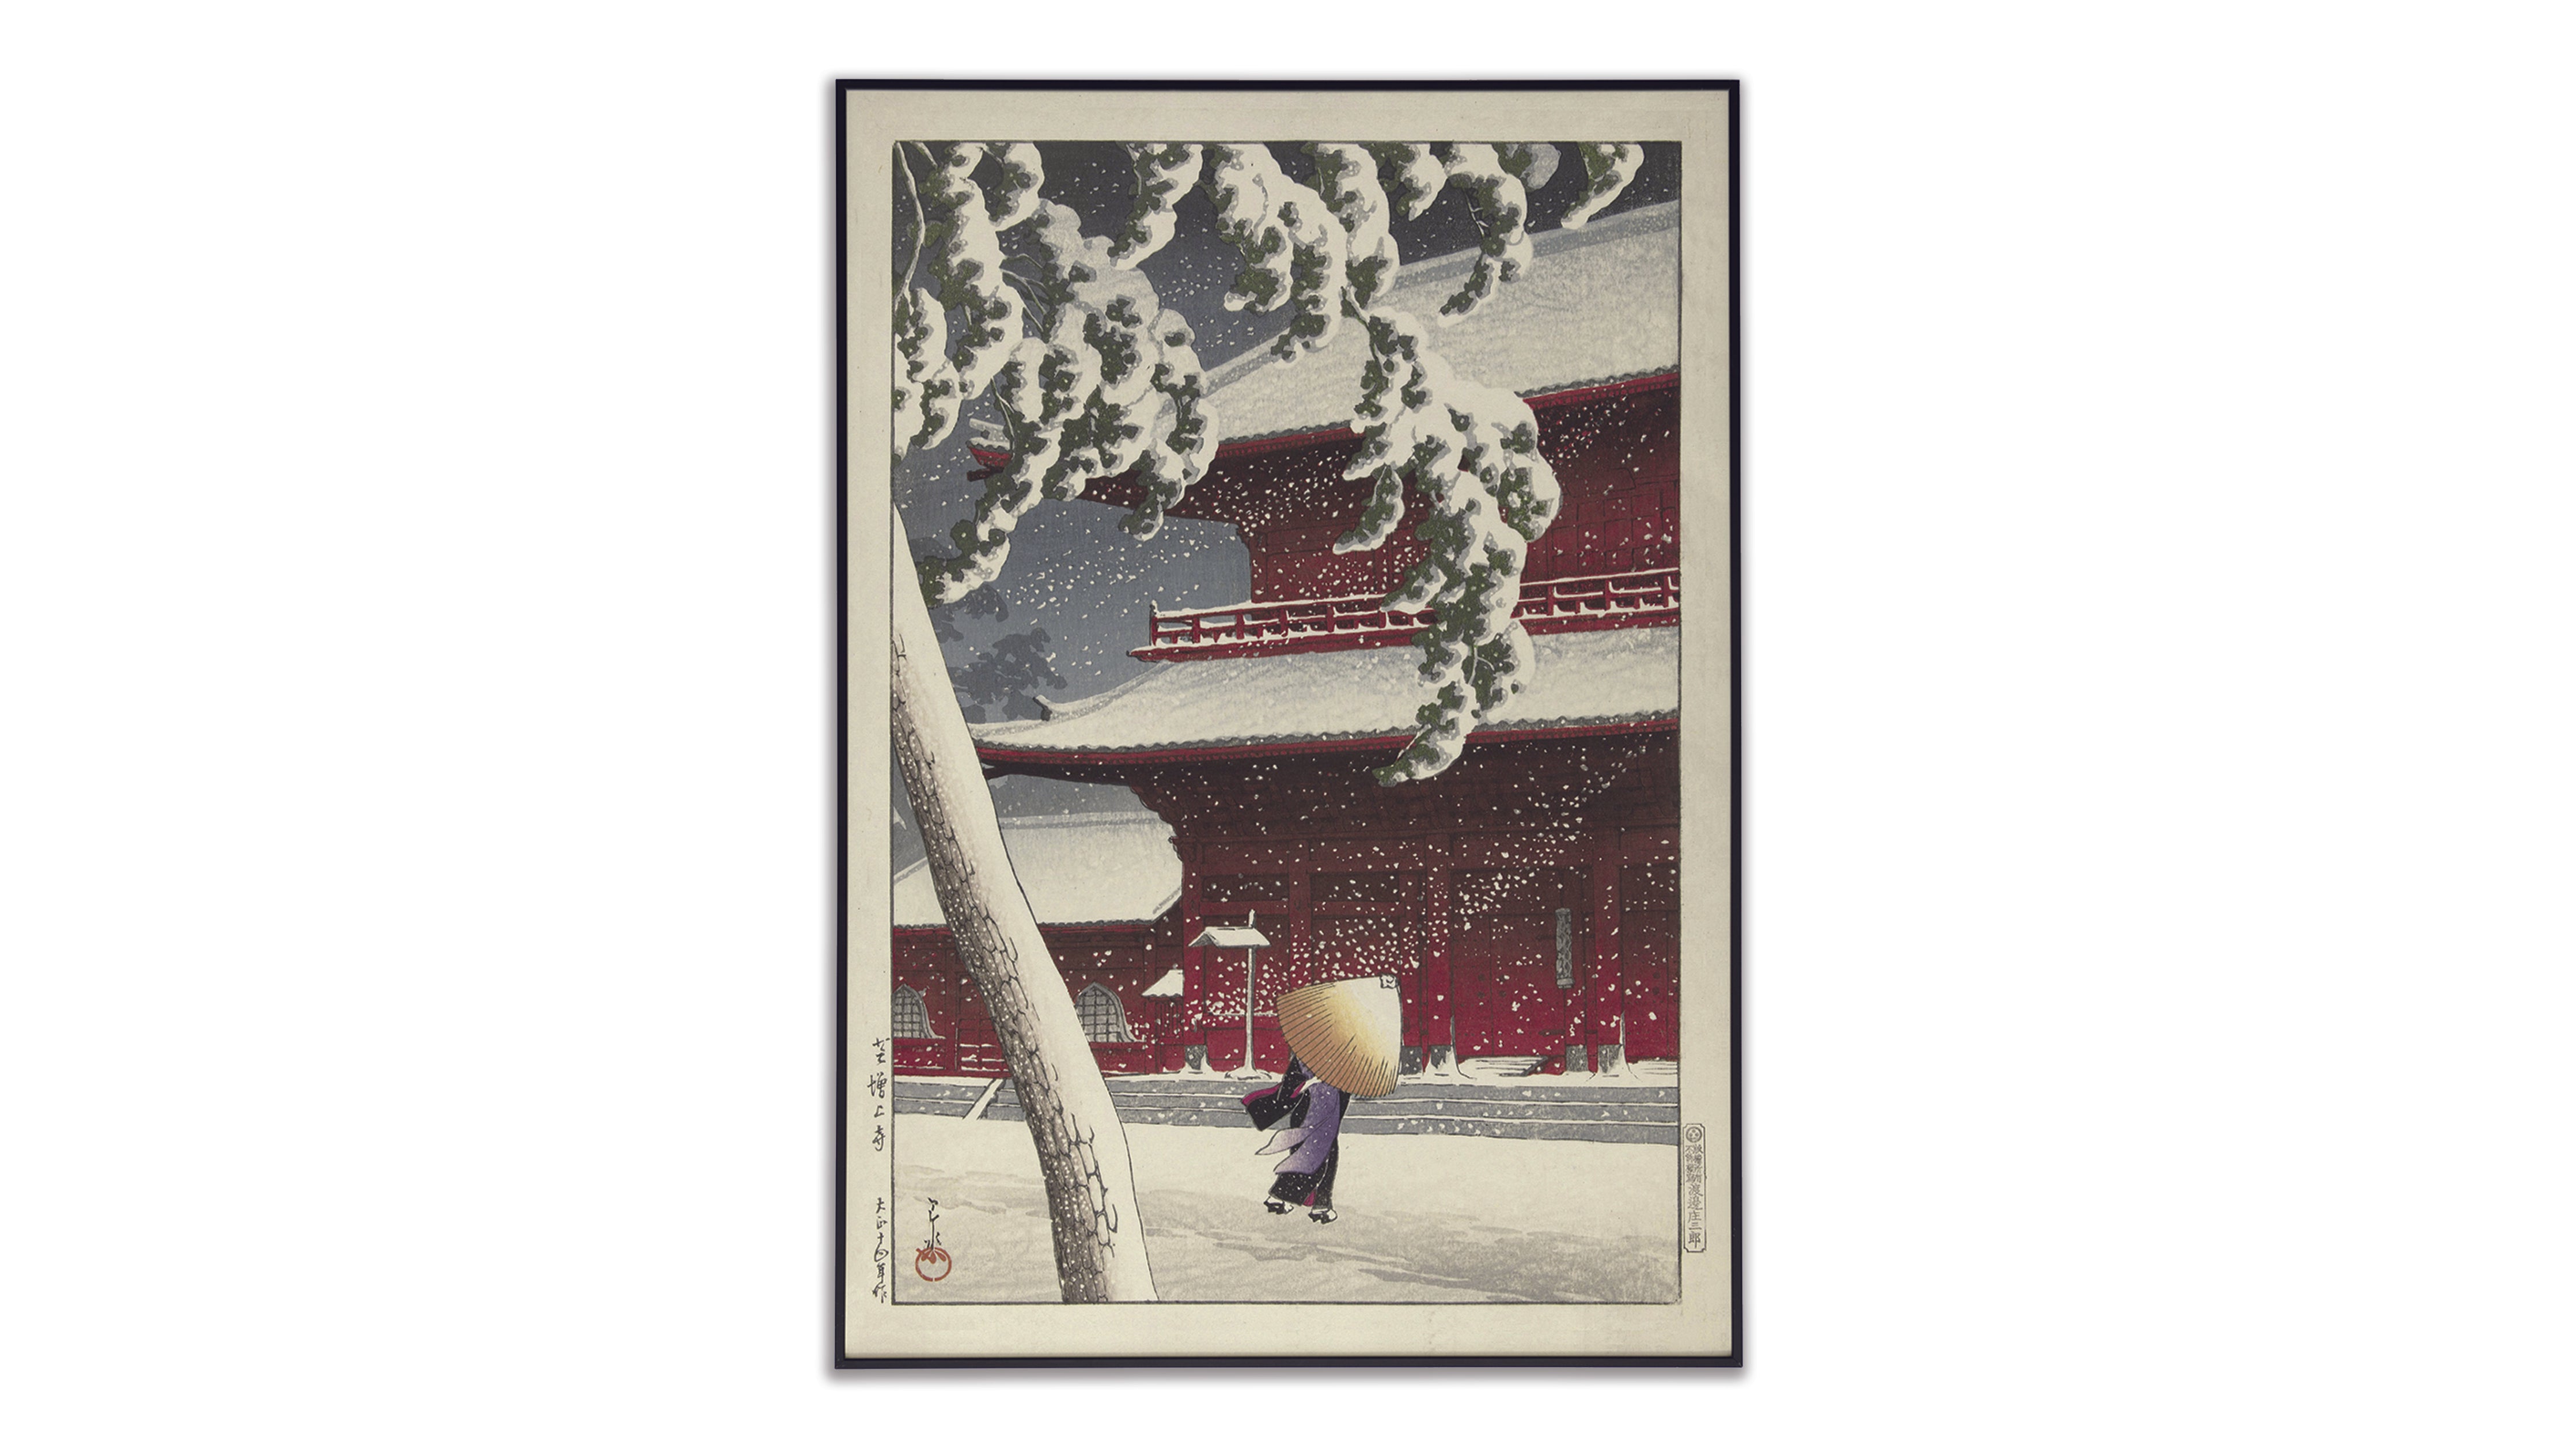 The Zojoji Temple by Hasui Kawase - Giant Poster